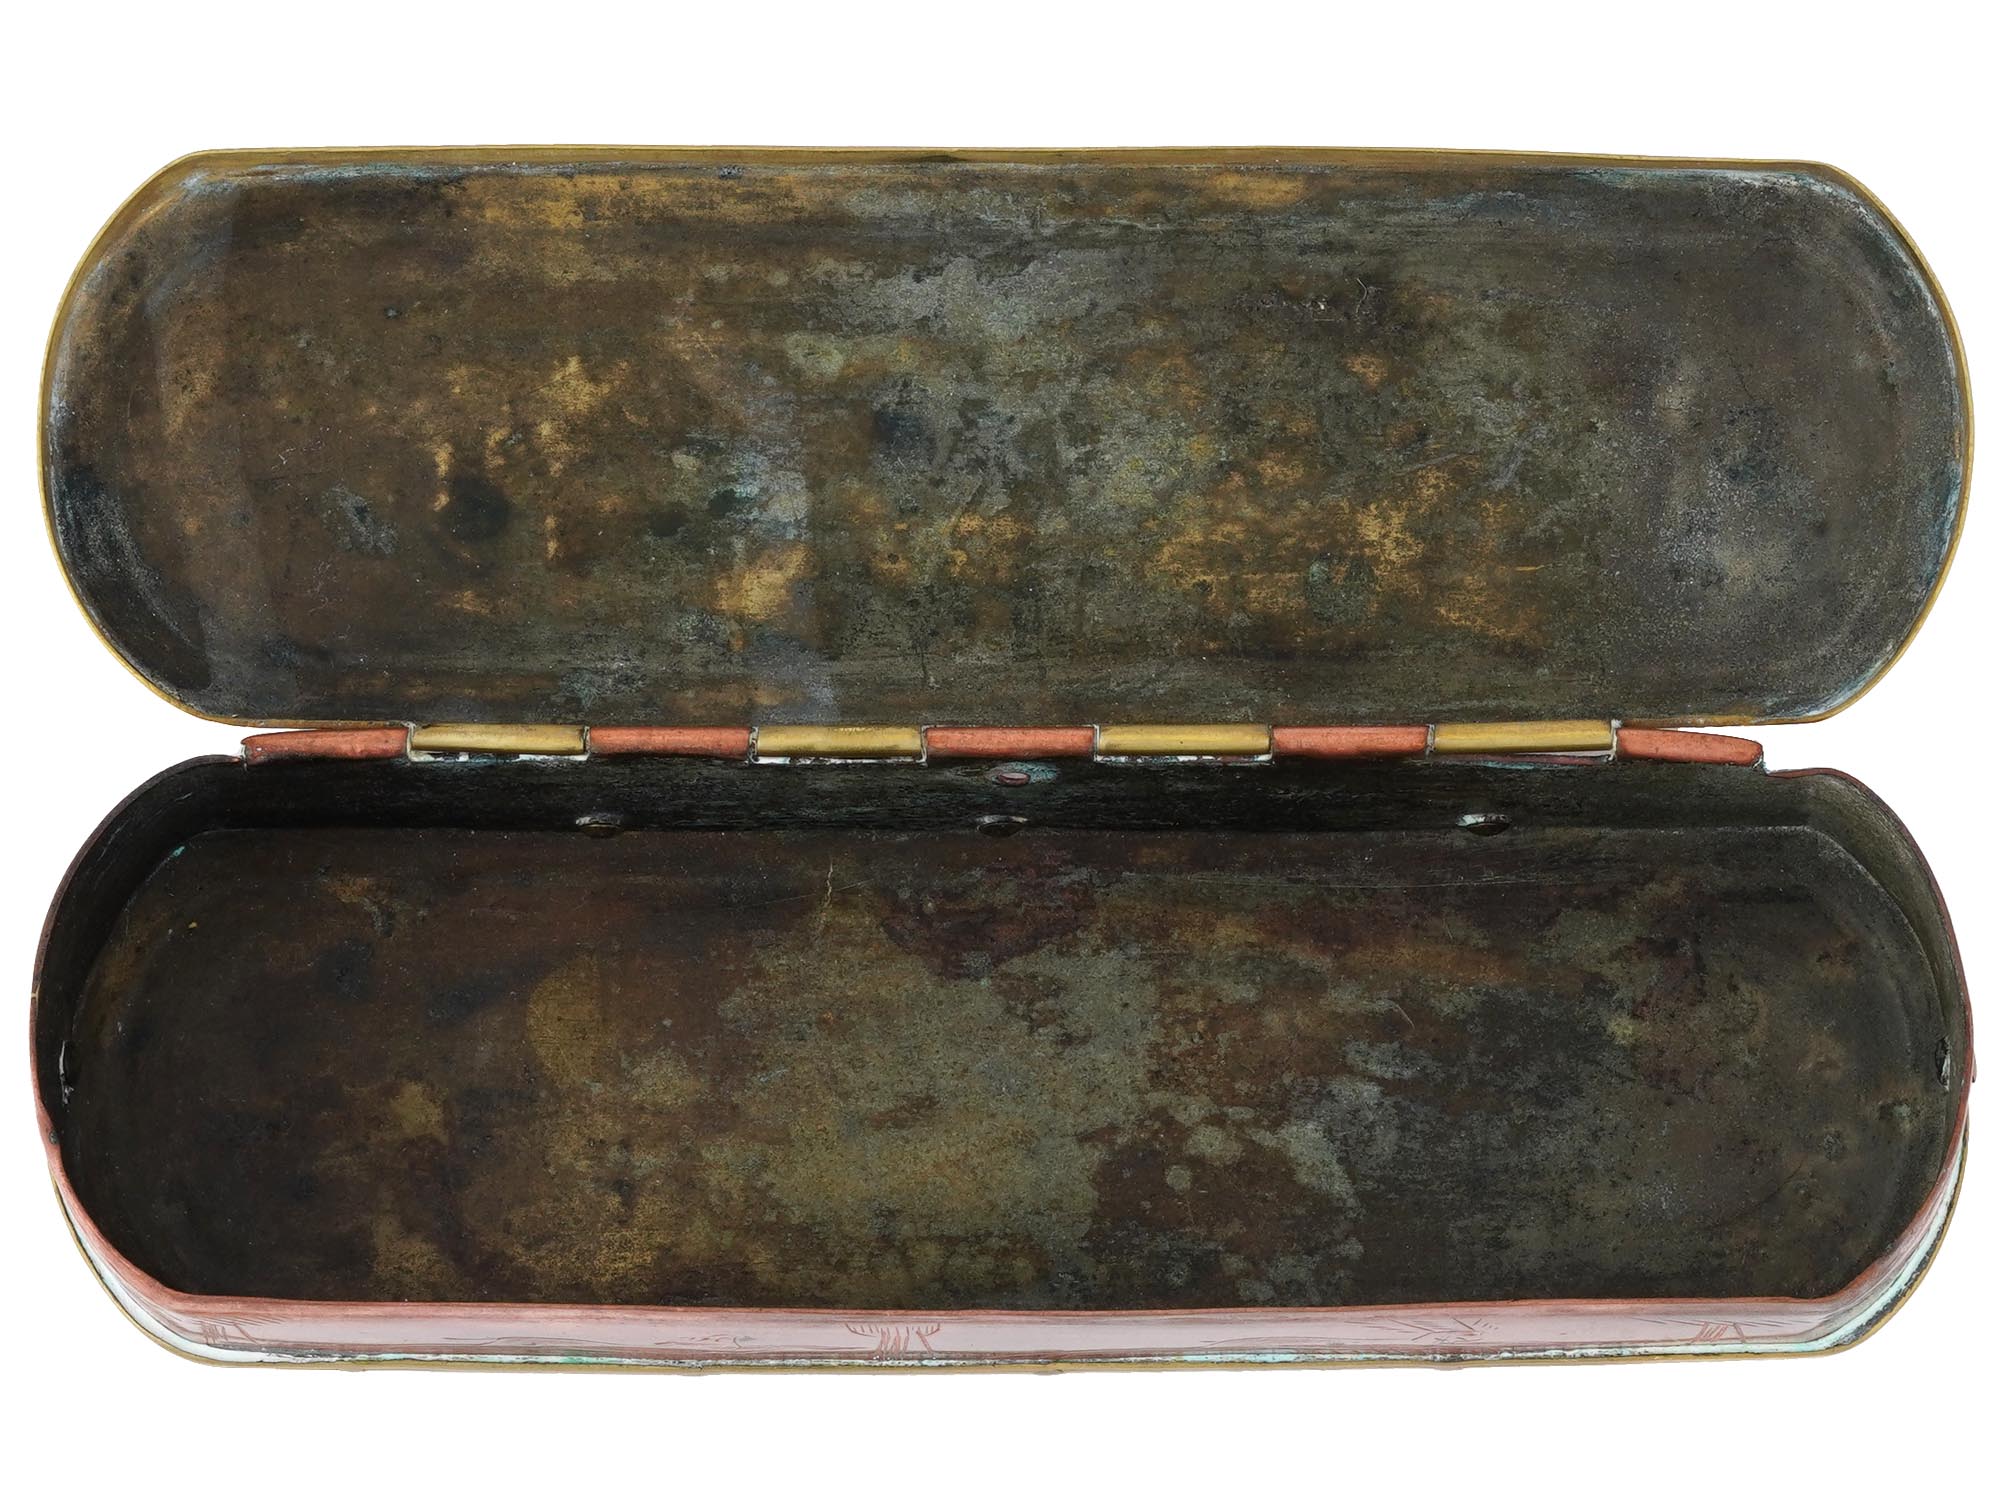 ANTIQUE COPPER ENGRAVED TOBACCO BOX WITH COVER PIC-3